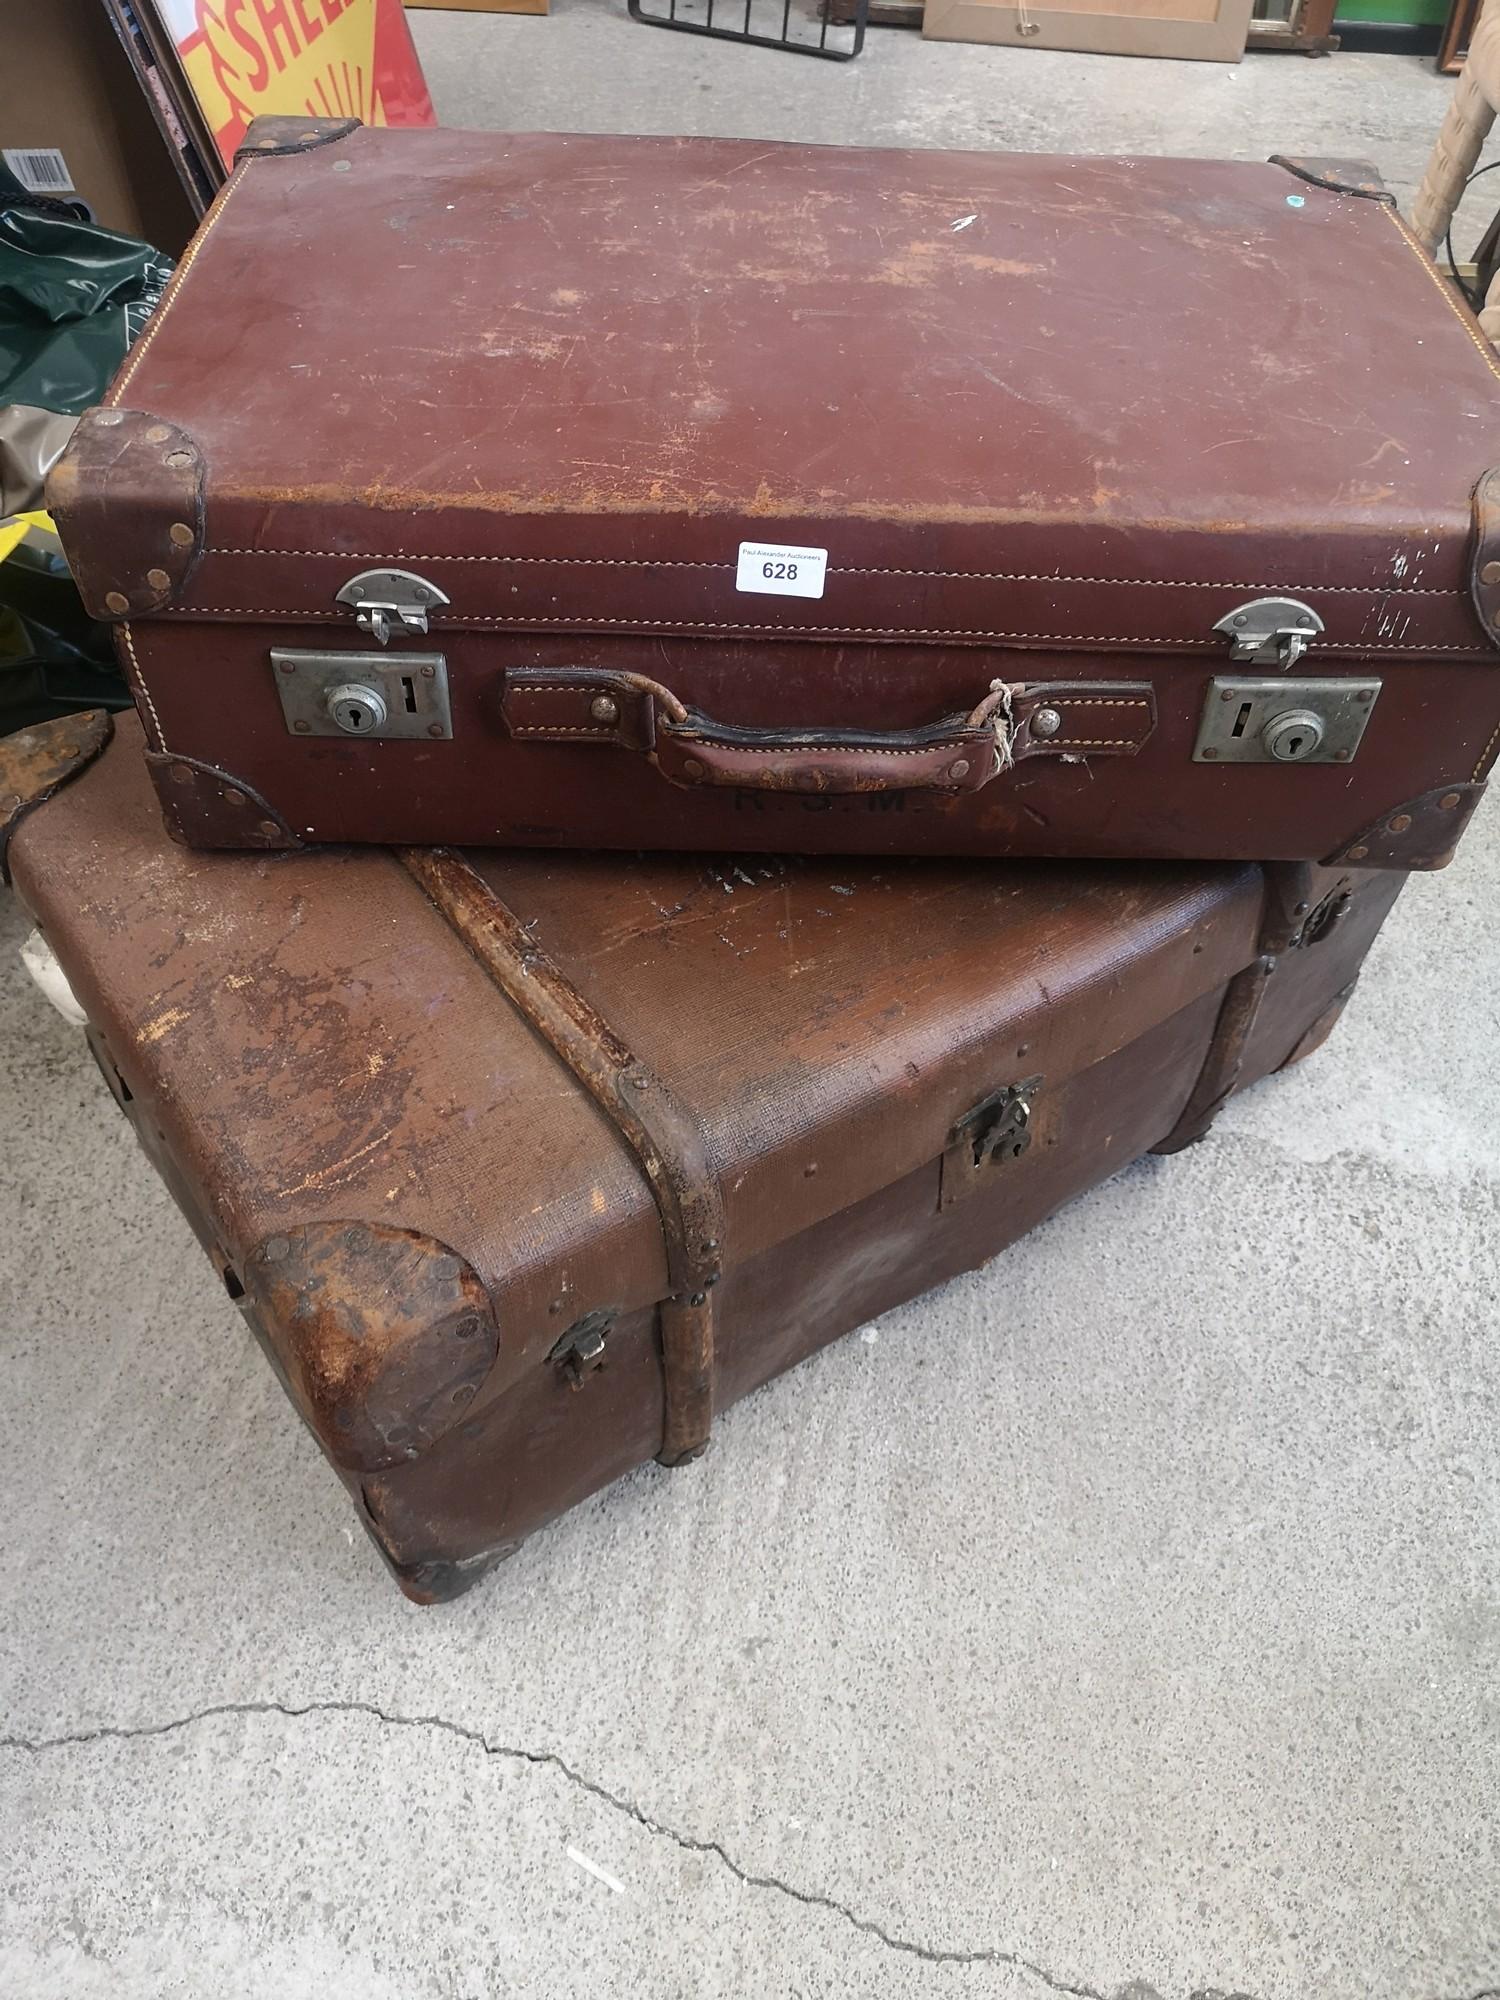 Vintage travel trunk with wooden bounding together with leather travel case. - Image 2 of 2